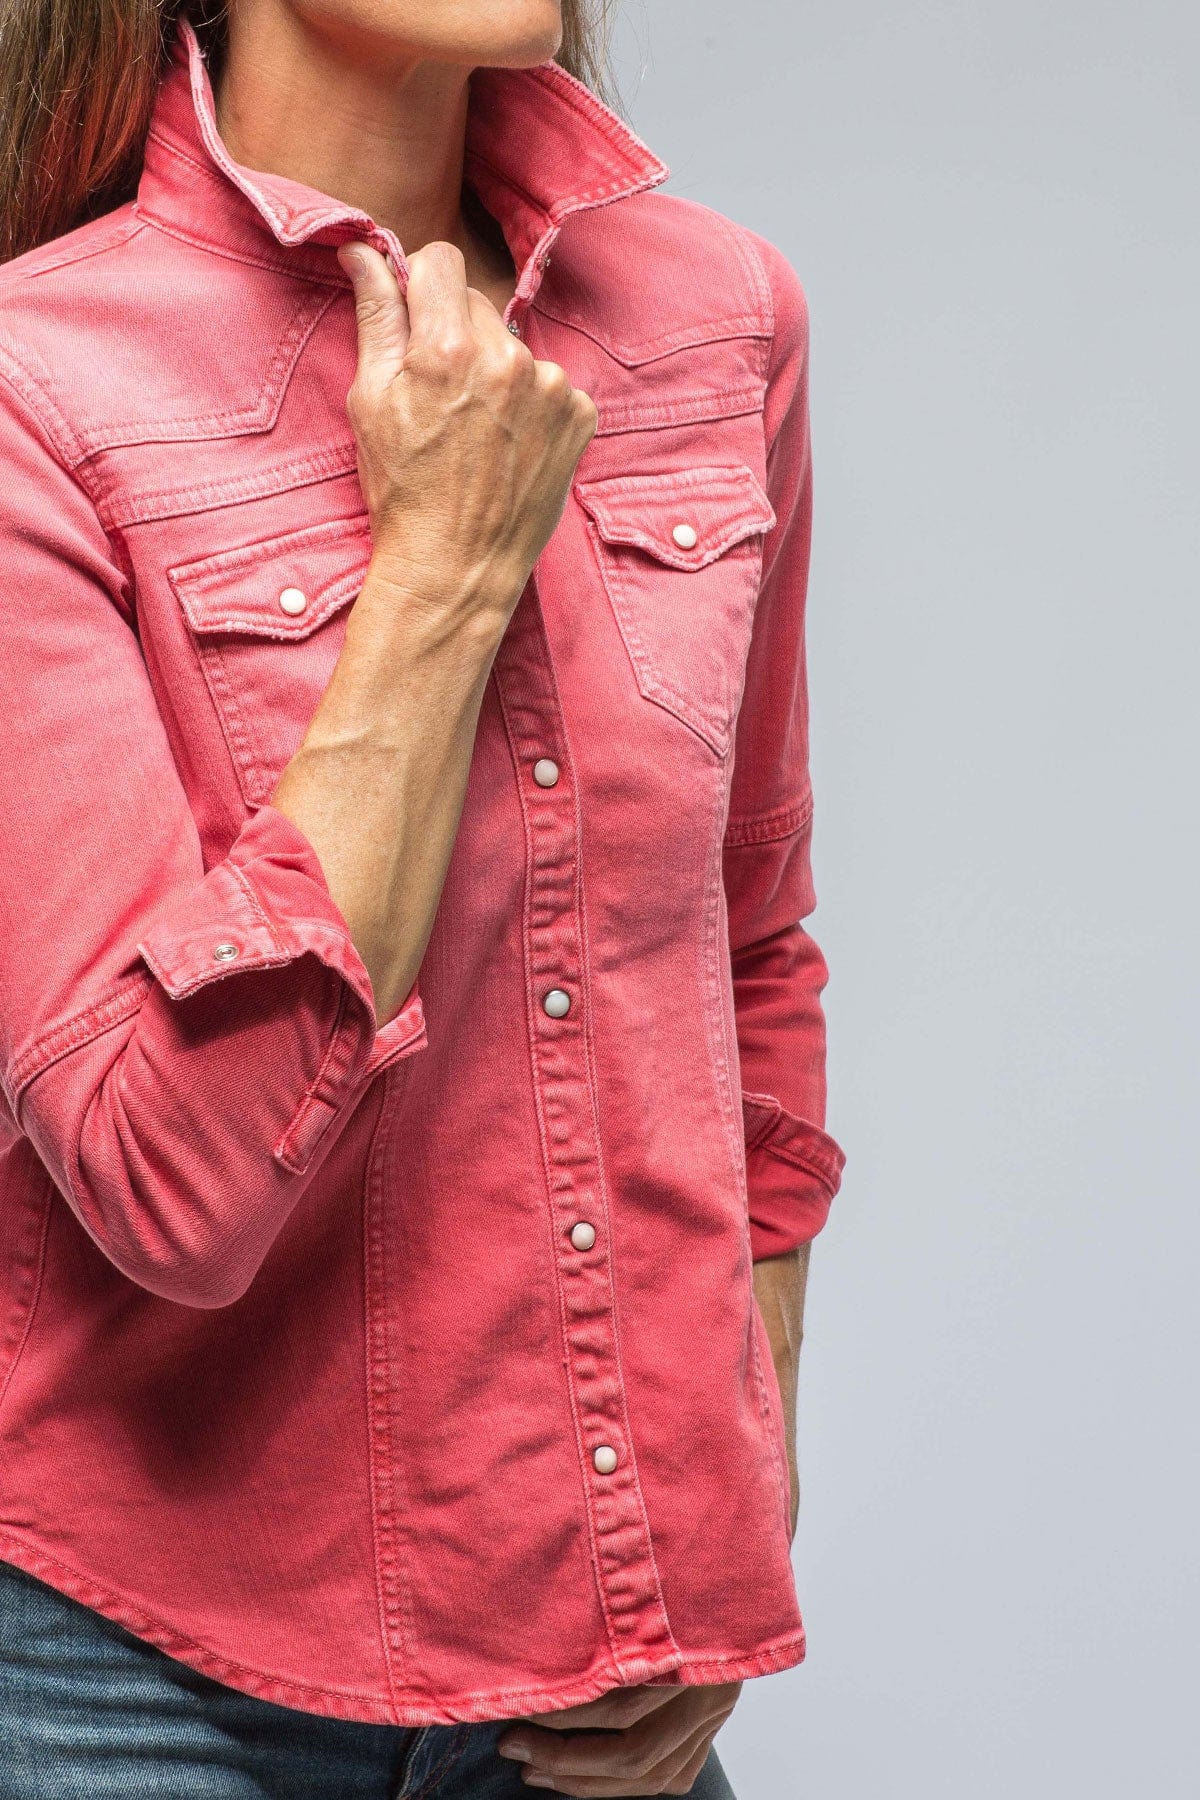 Sweetwater Denim Shirt In Washed Corallo - AXEL'S